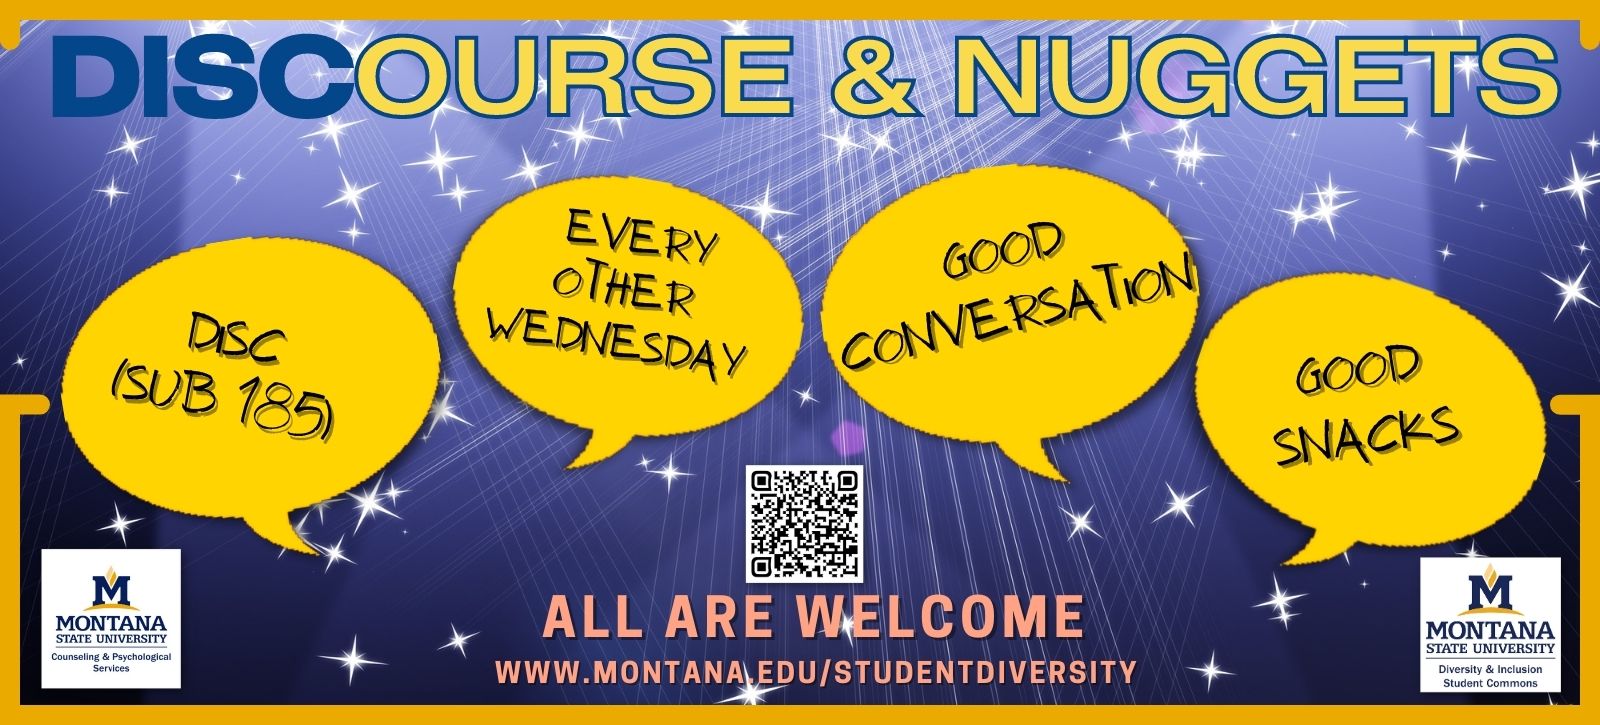 DISCourse & Nuggets: Good Snacks; Good Conversation.  Every other Wednesday, every semester, in the DISC SUB 185